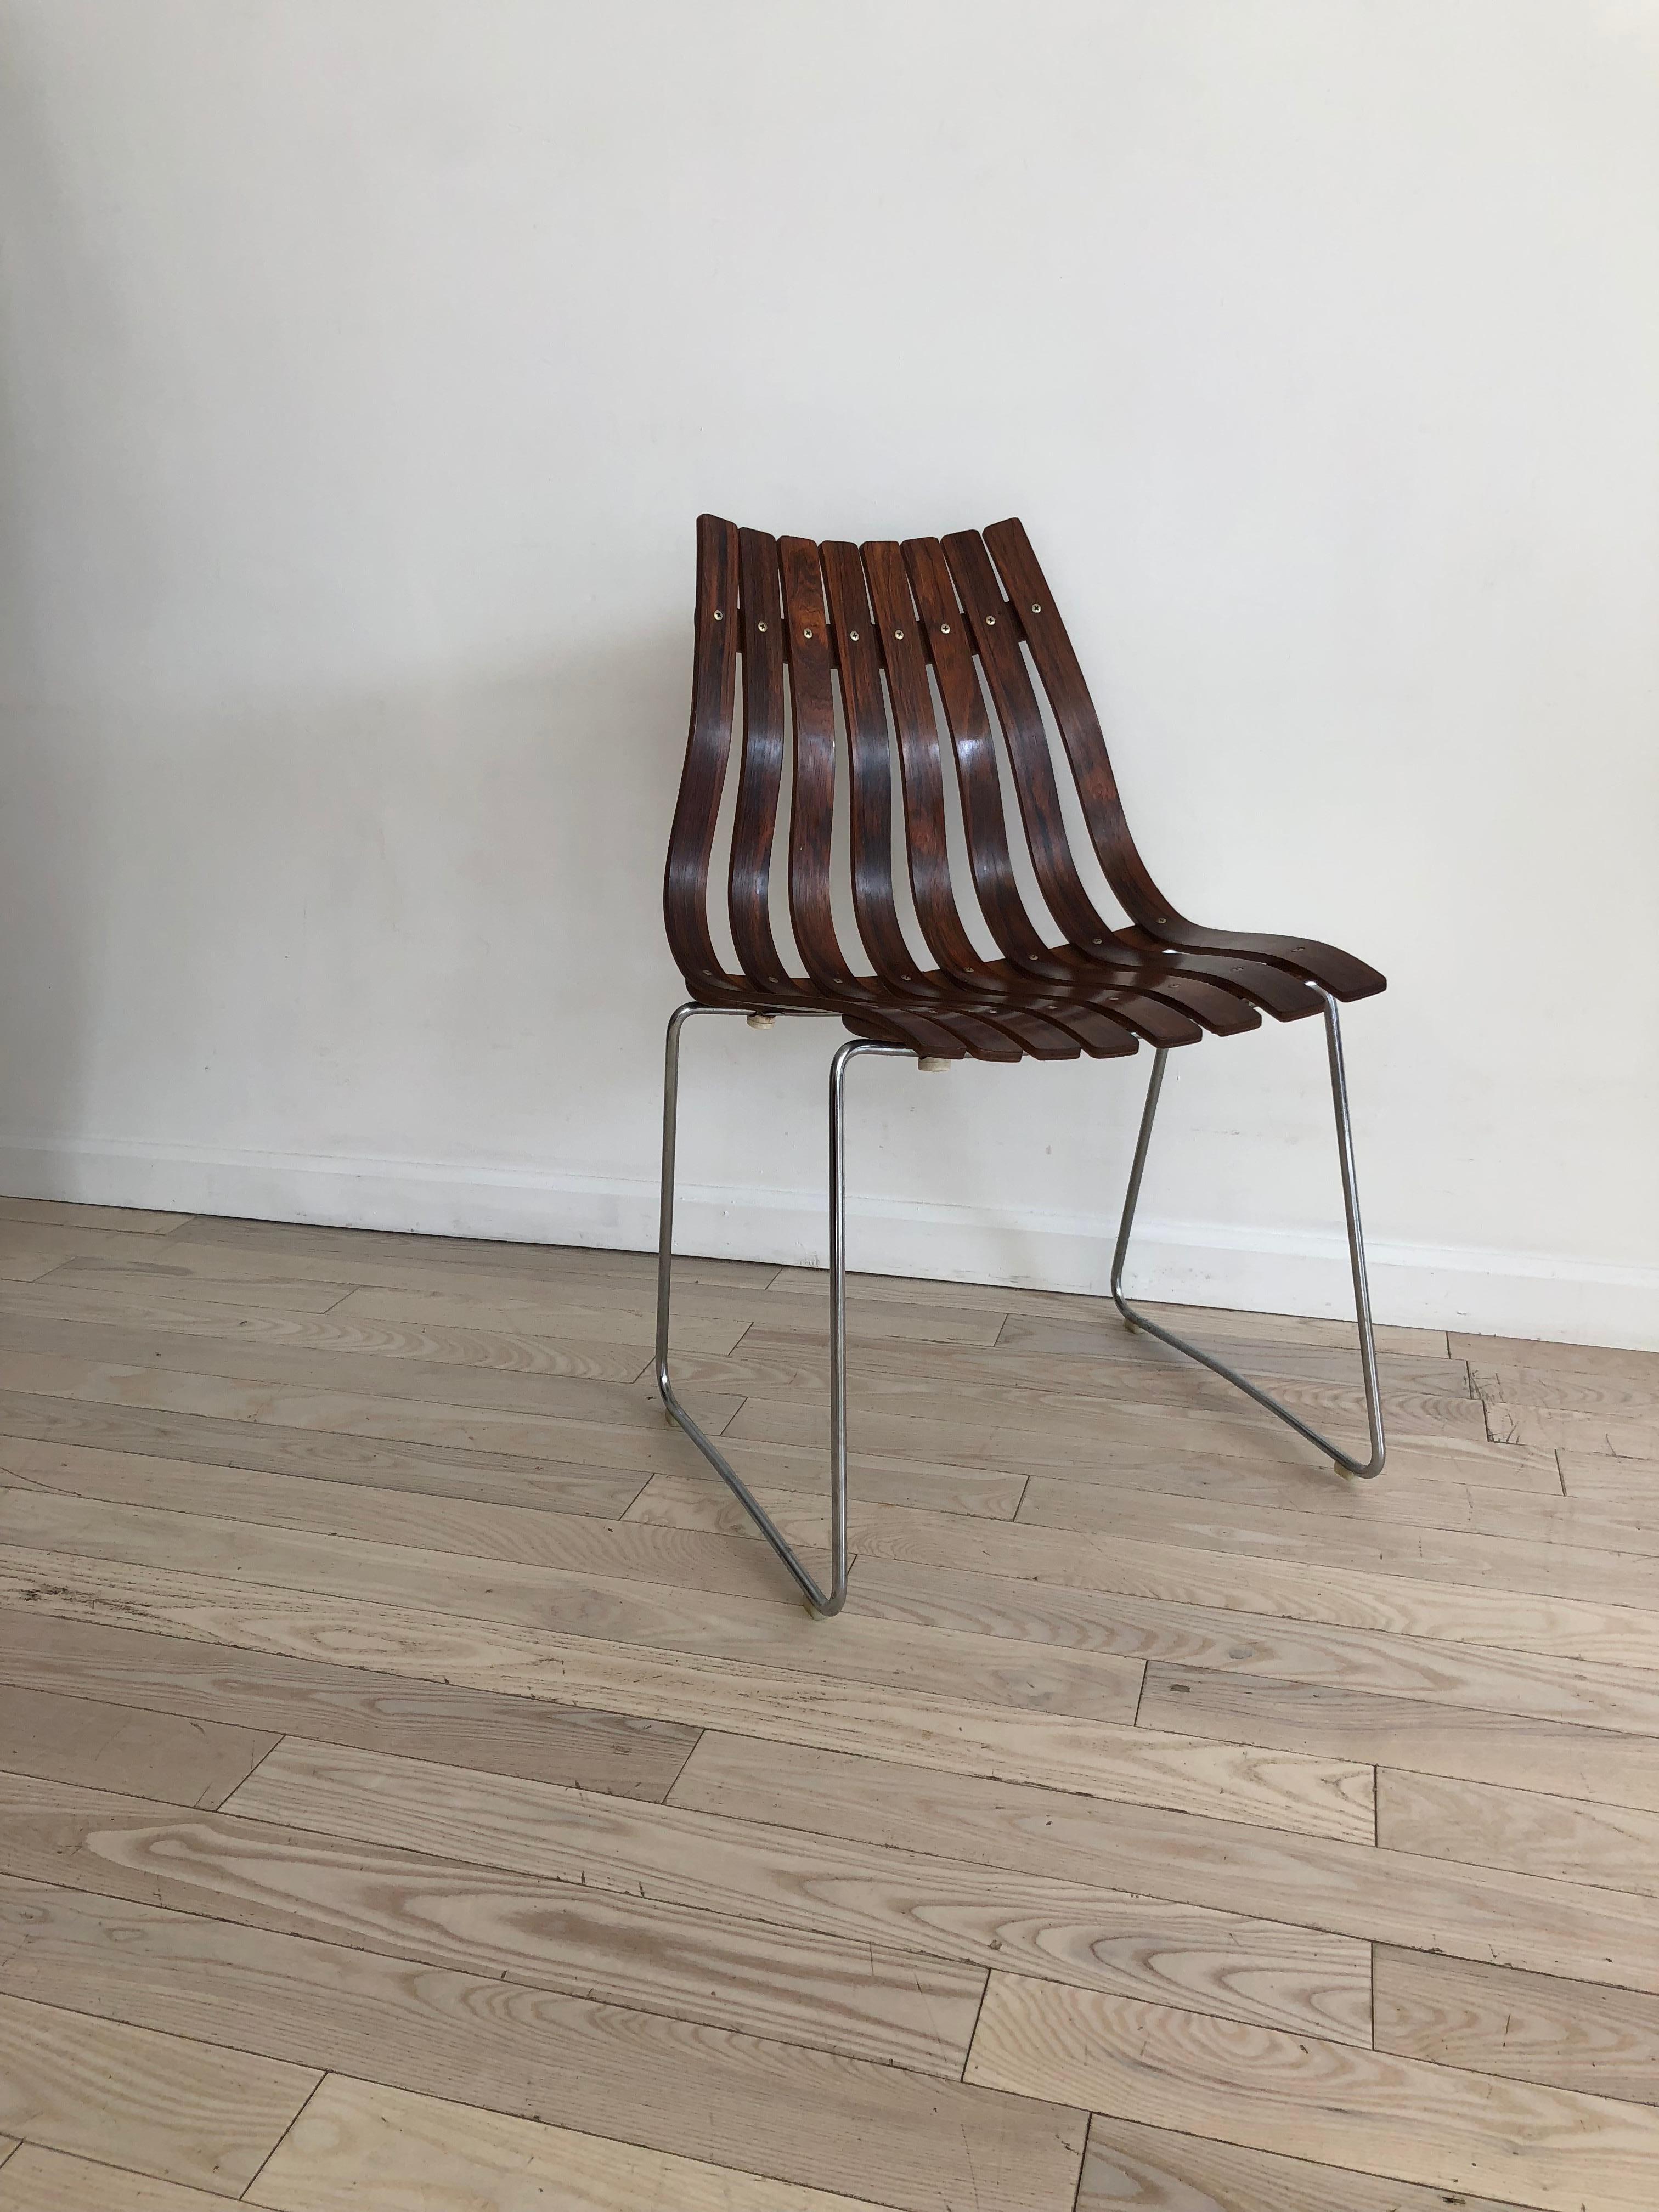 Beautiful slatted bent rosewood chair by Hans Brattrud made in Norway by Hove Mobler. From 1958. Small chip on top. Chrome legs with mild patina.